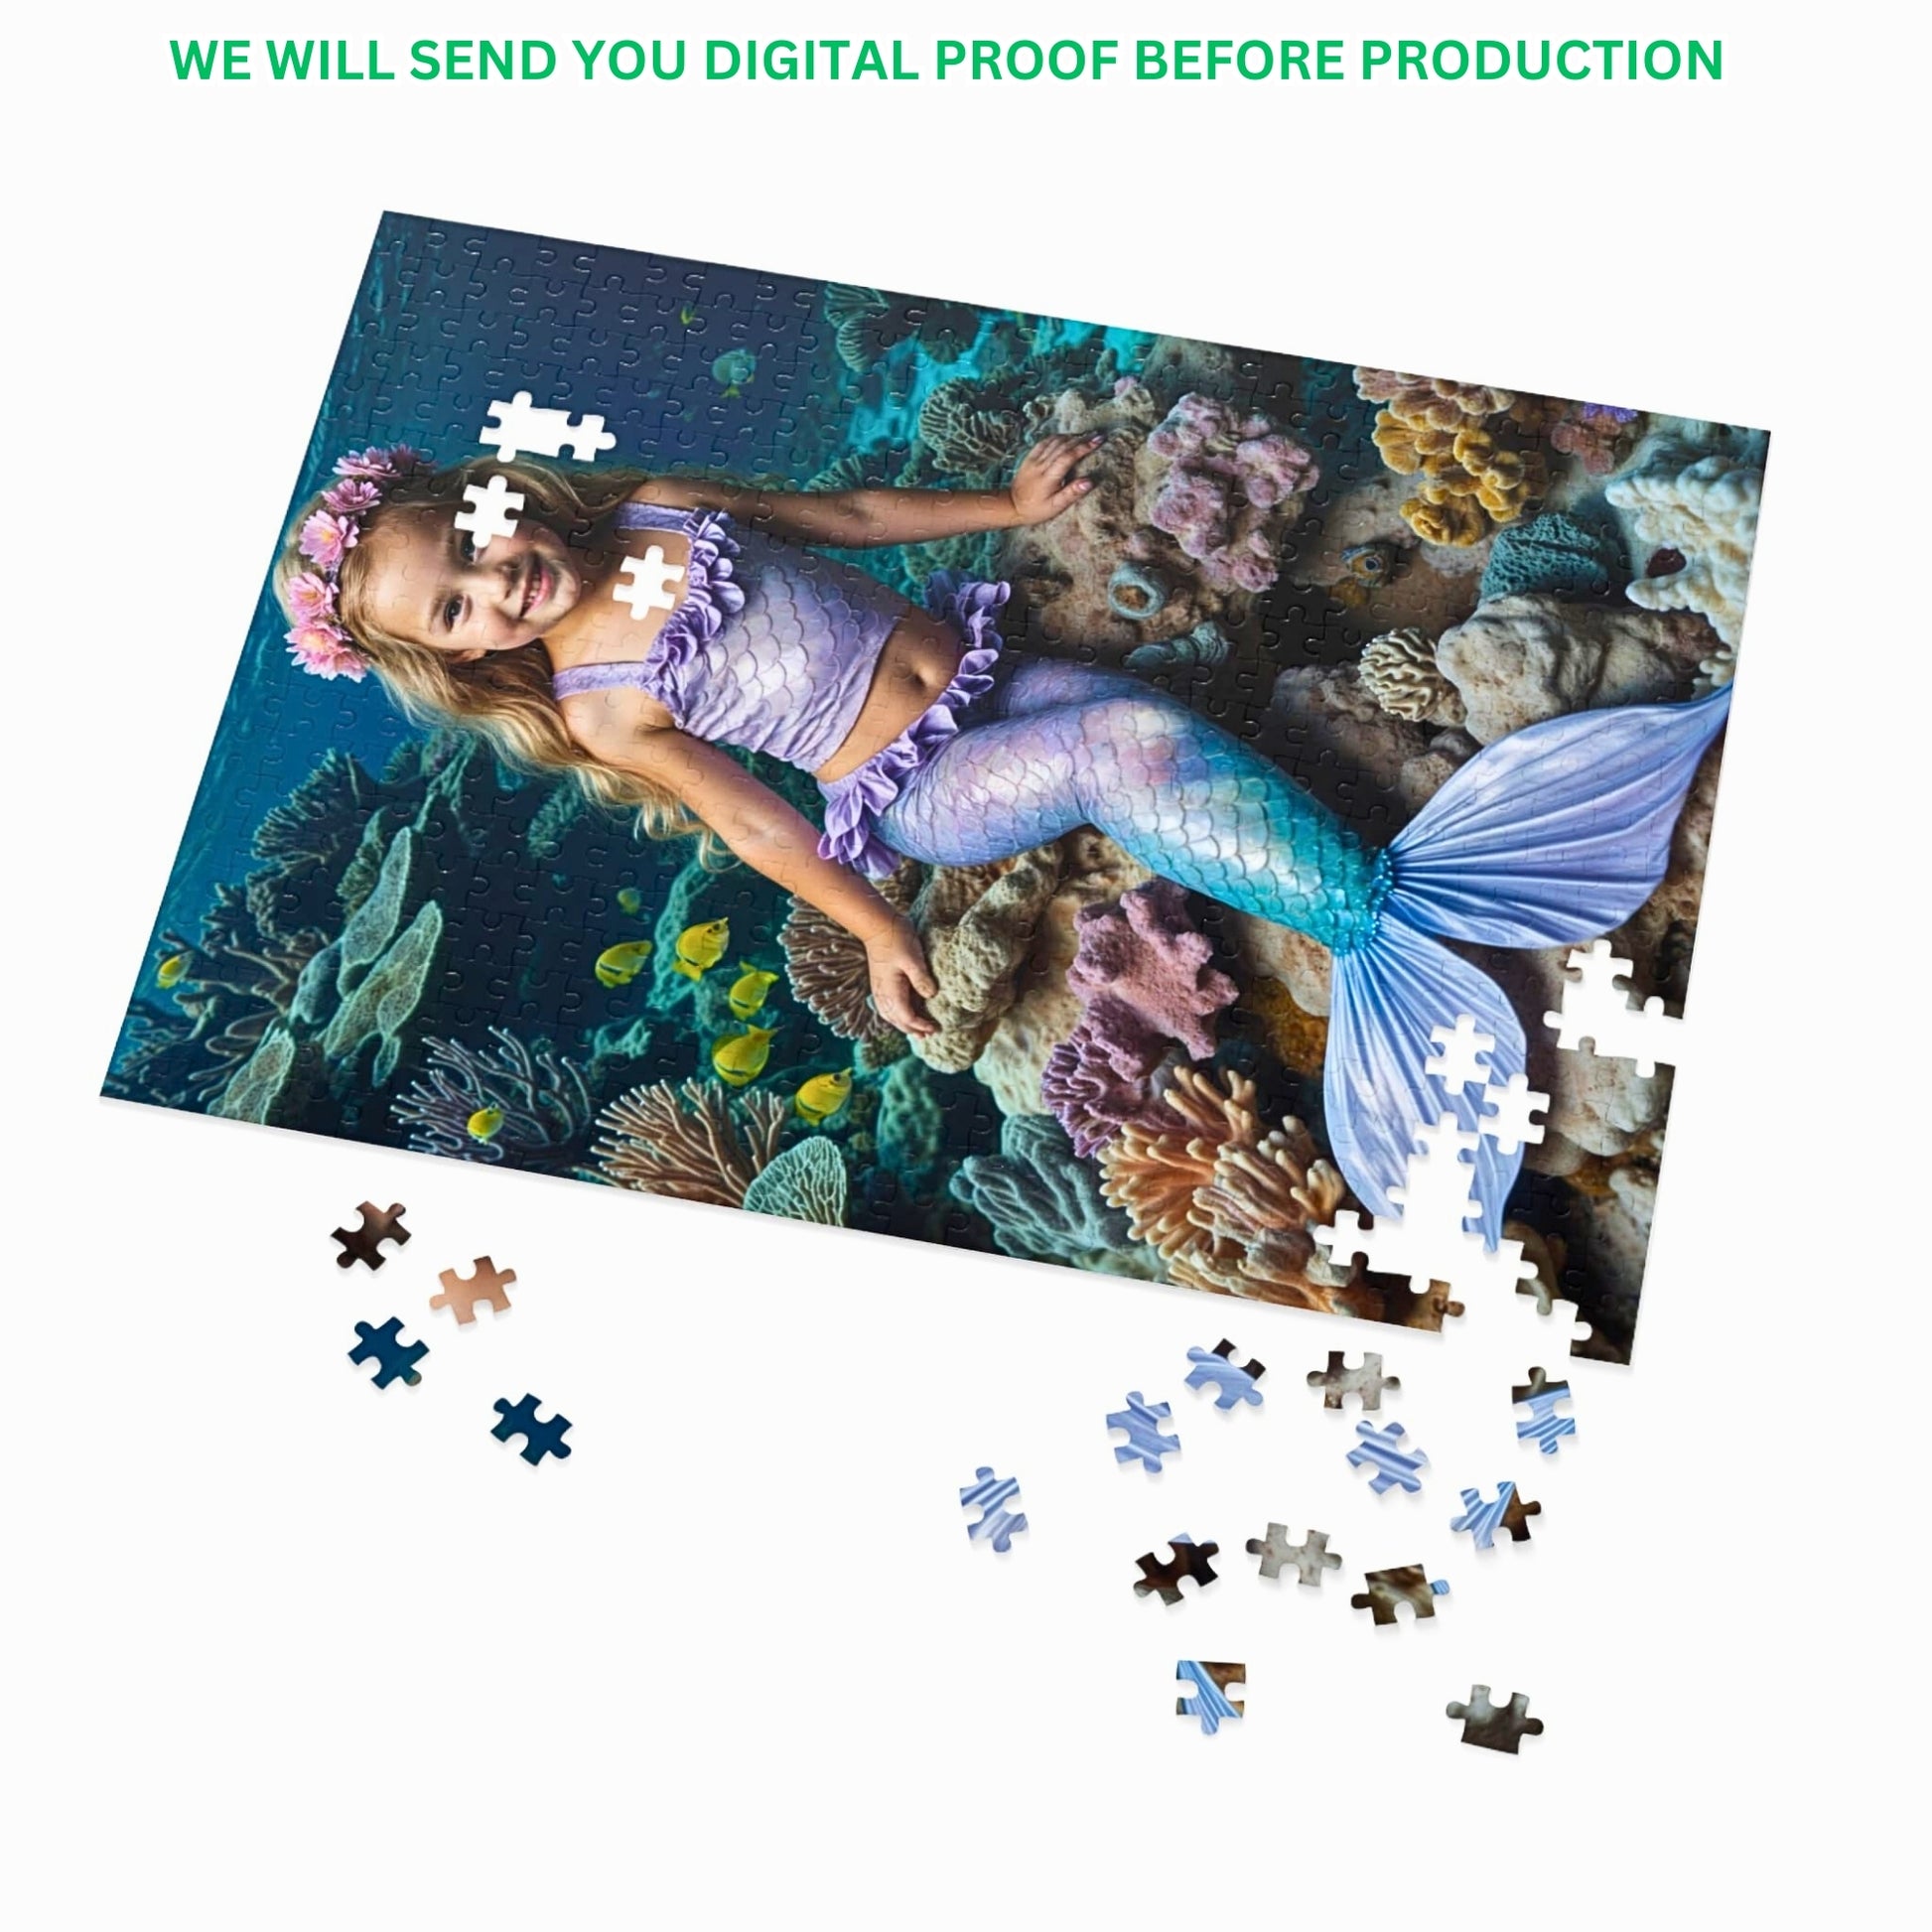 Create Your Own Mermaid Adventure Puzzle! Turn Your Photo into a Personalized Little Mermaid Puzzle. Perfect Princess Portrait Gift. Choose Your Puzzle Size: 250 to 1000 Pieces. Ideal for Birthdays or Special Occasions.